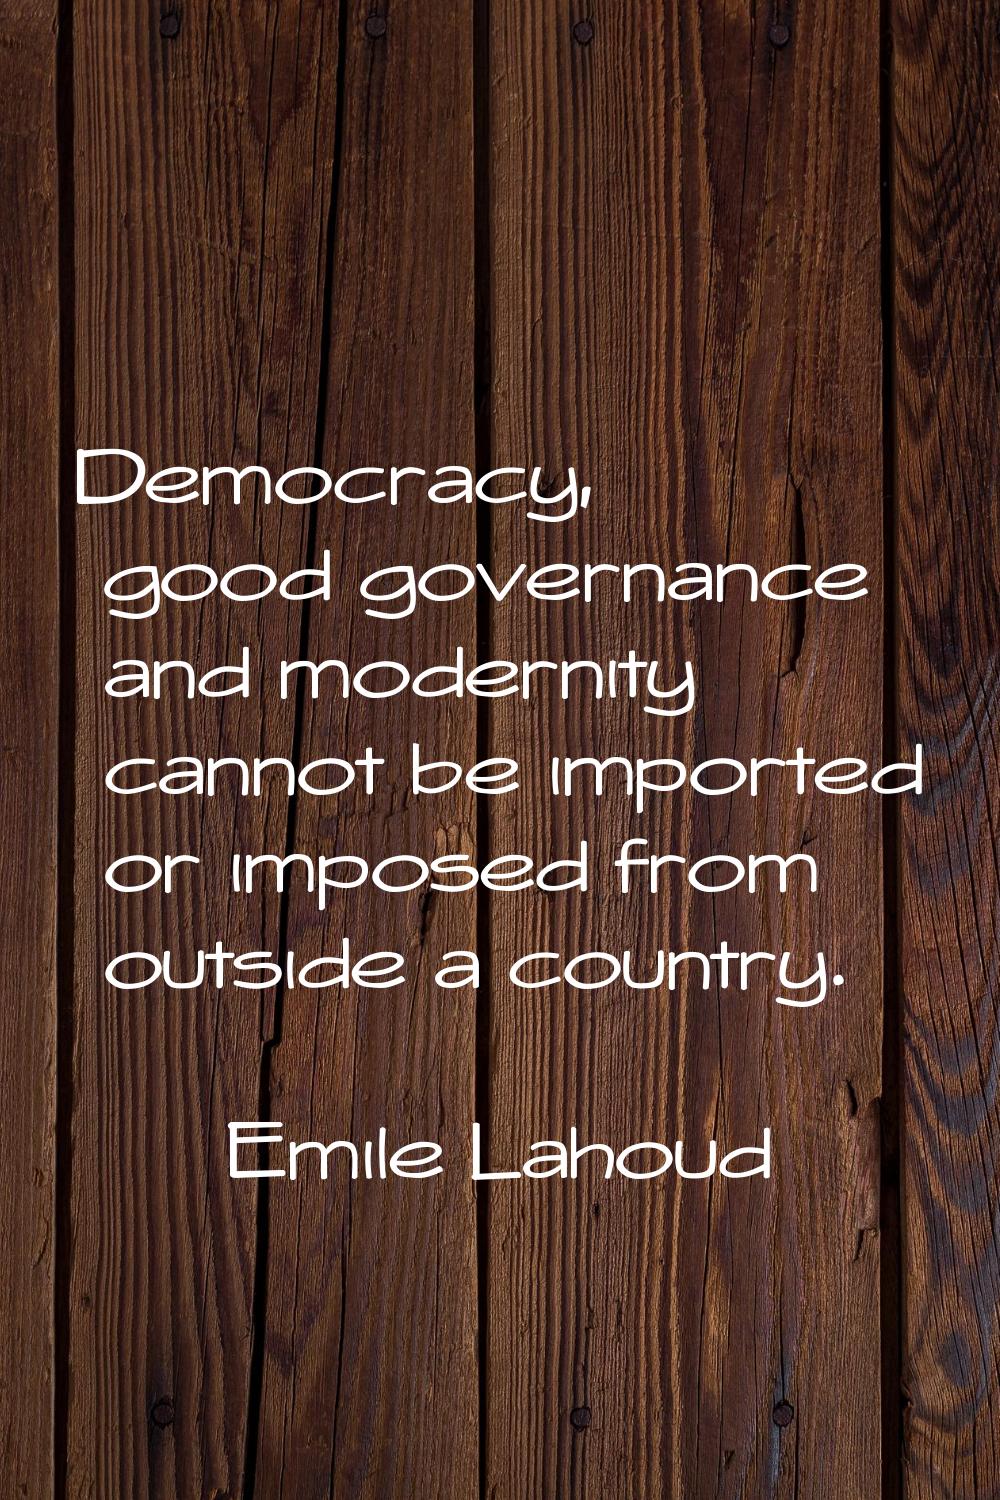 Democracy, good governance and modernity cannot be imported or imposed from outside a country.